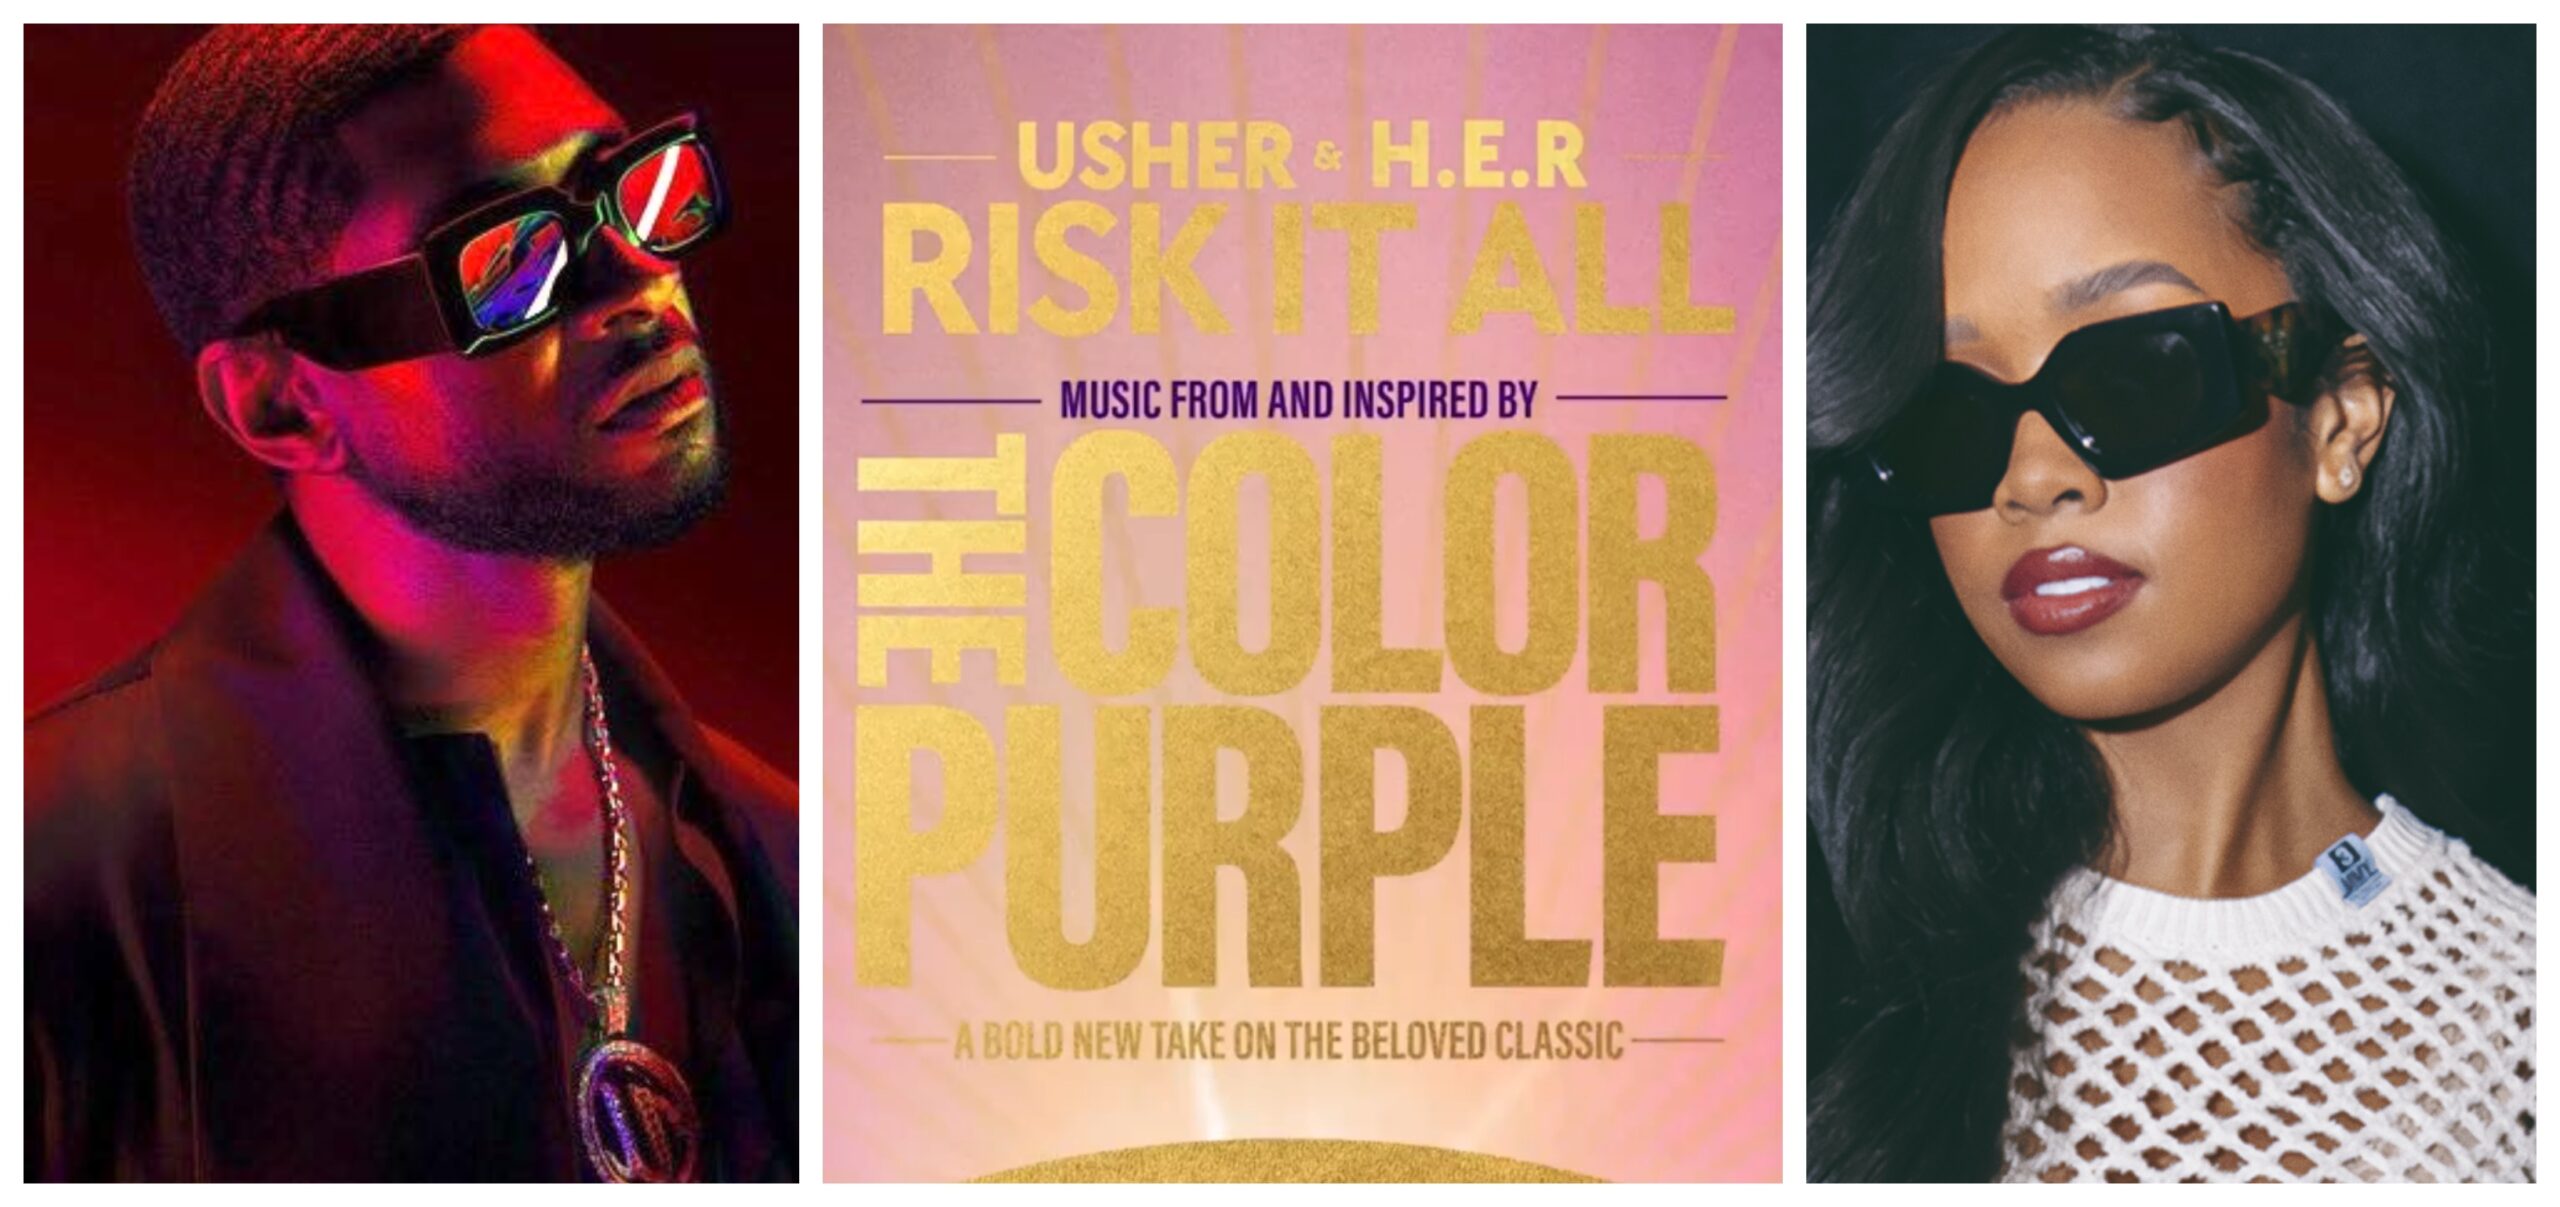 New Song: Usher & H.E.R. – ‘Risk It All’ [‘The Color Purple’ Soundtrack]